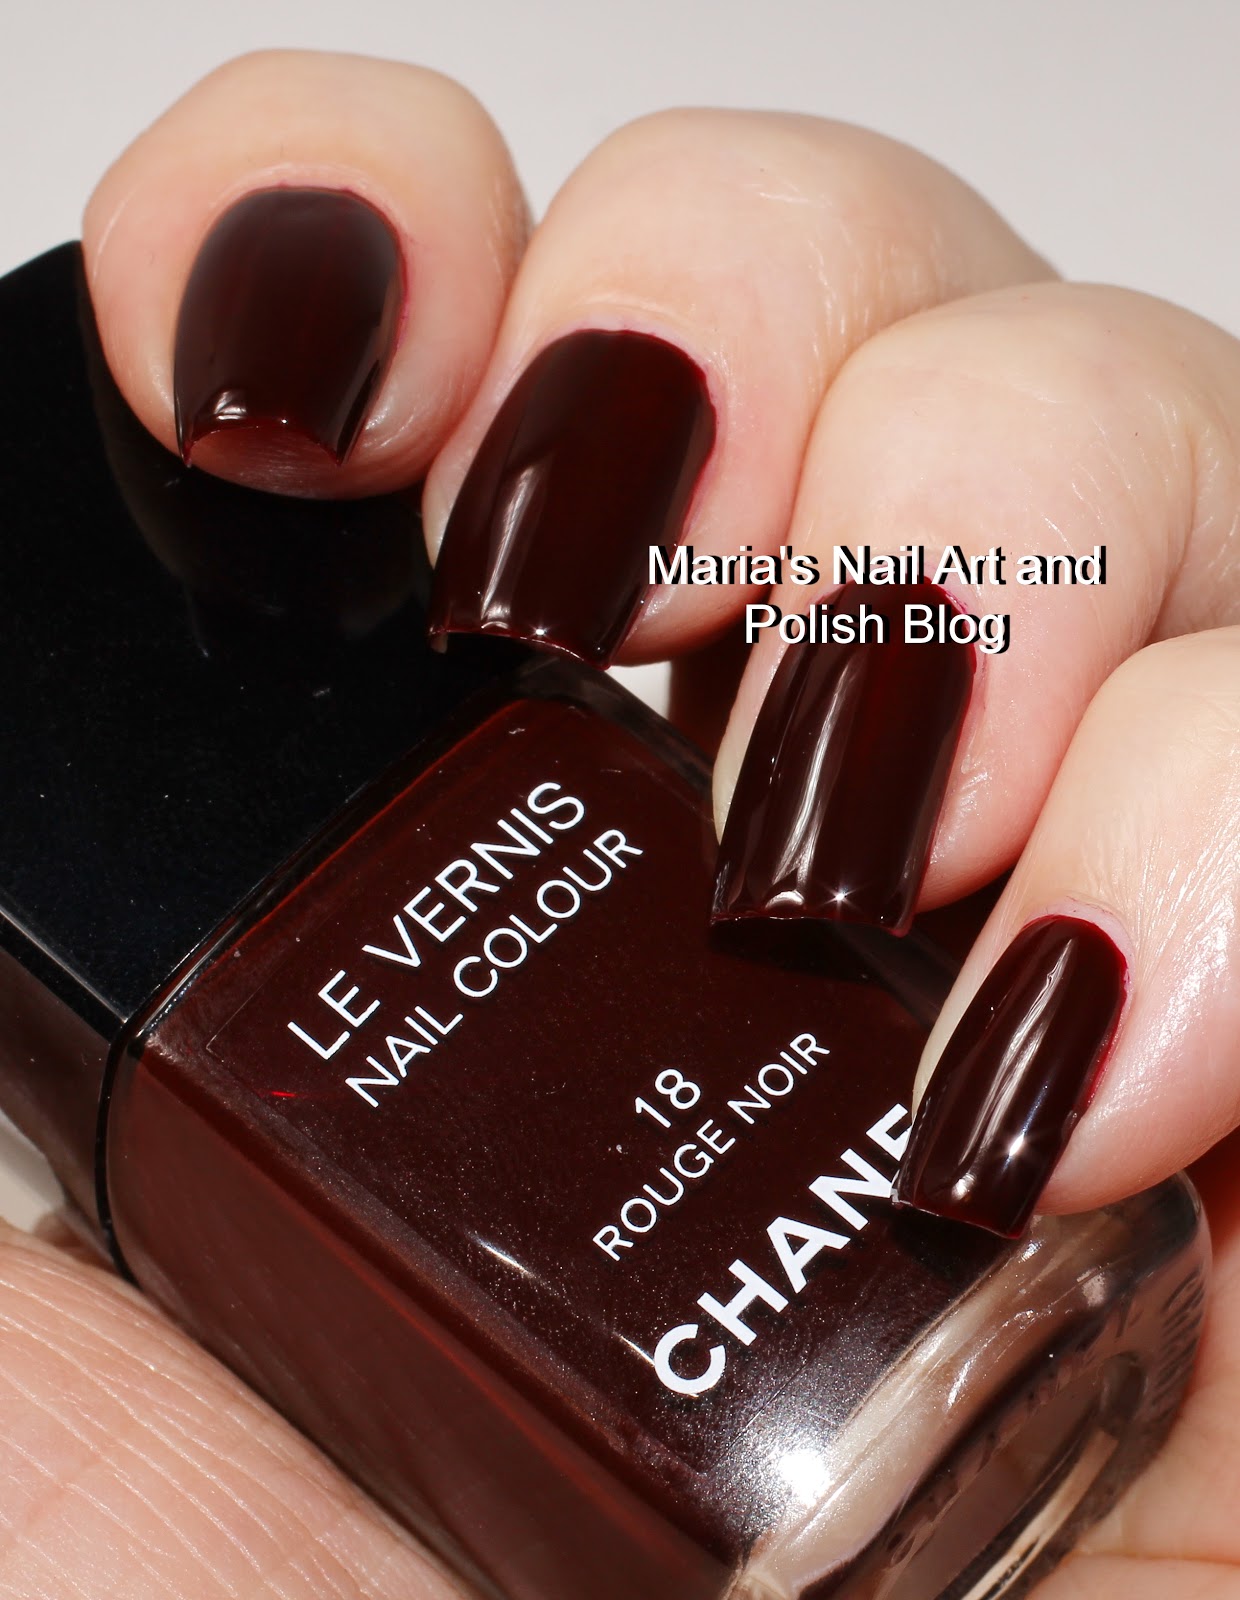 Marias Nail Art and Polish Blog: Chanel Rouge Noir Absolutement coll.